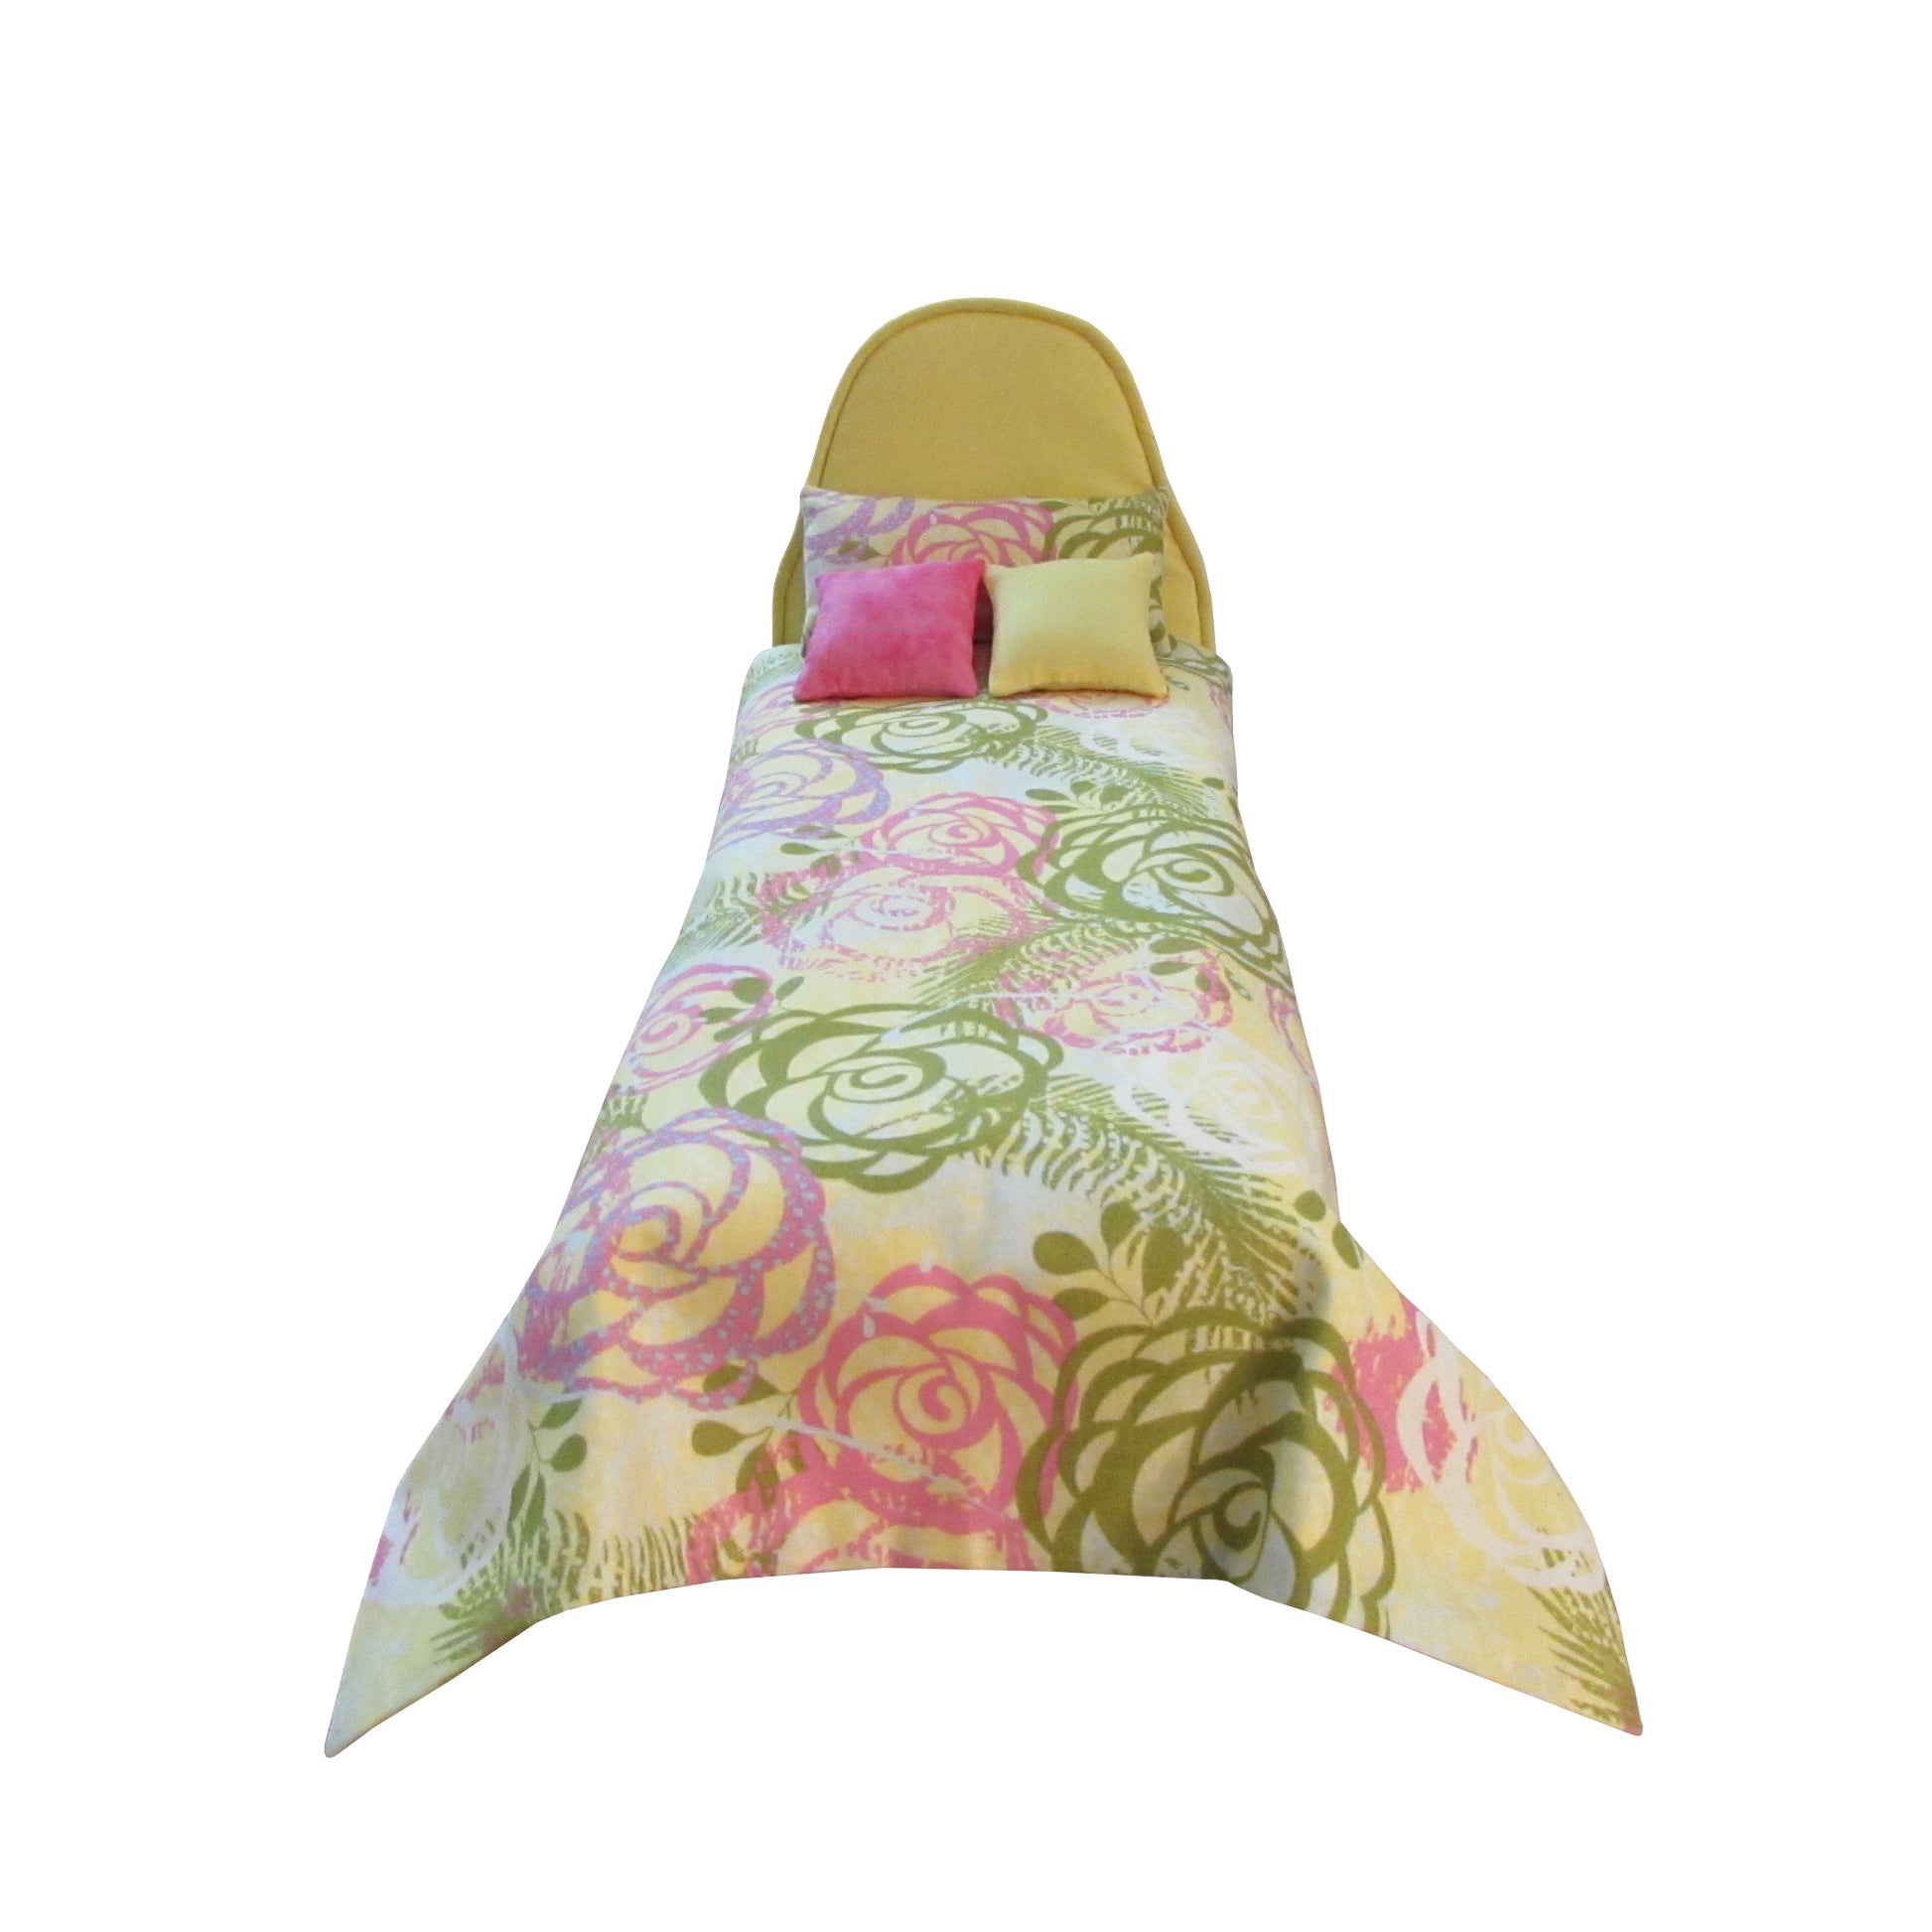 Light Yellow Doll Bed and Floral Bedding for 11.5-inch and 12-inch dolls Front view